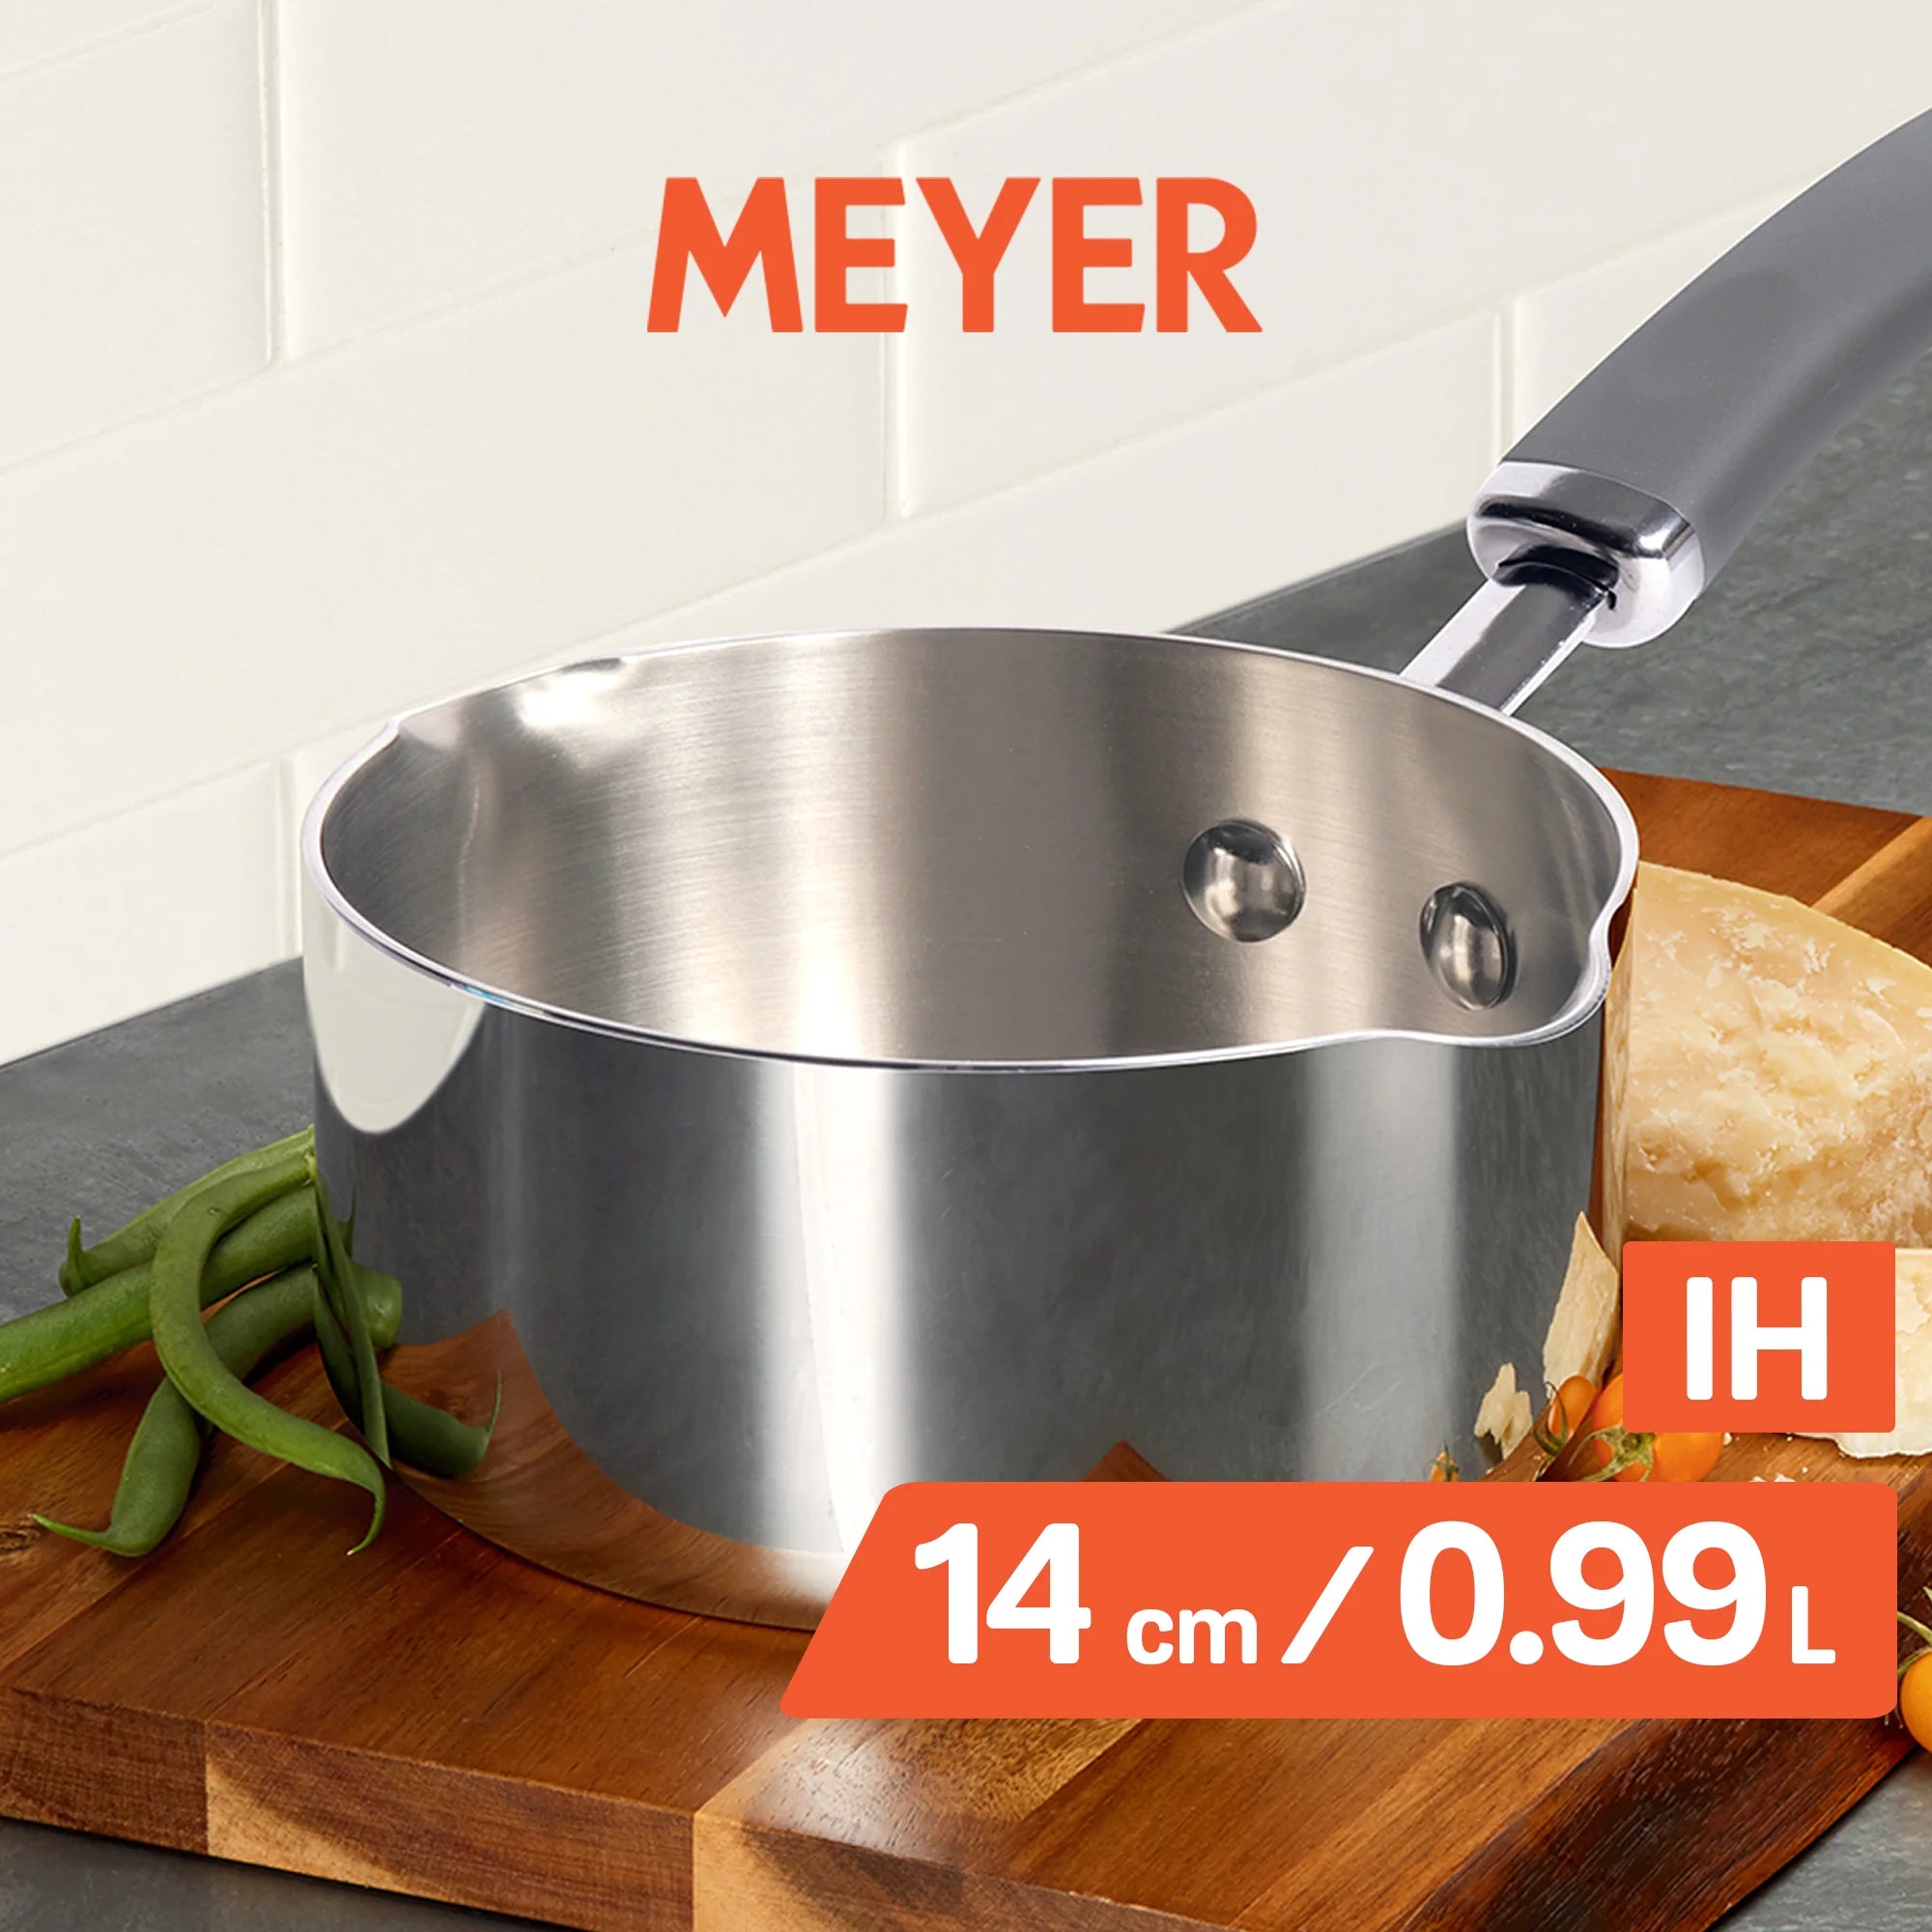 Meyer Trivantage Stainless Steel Triply Cookware Milkpan, 14cm